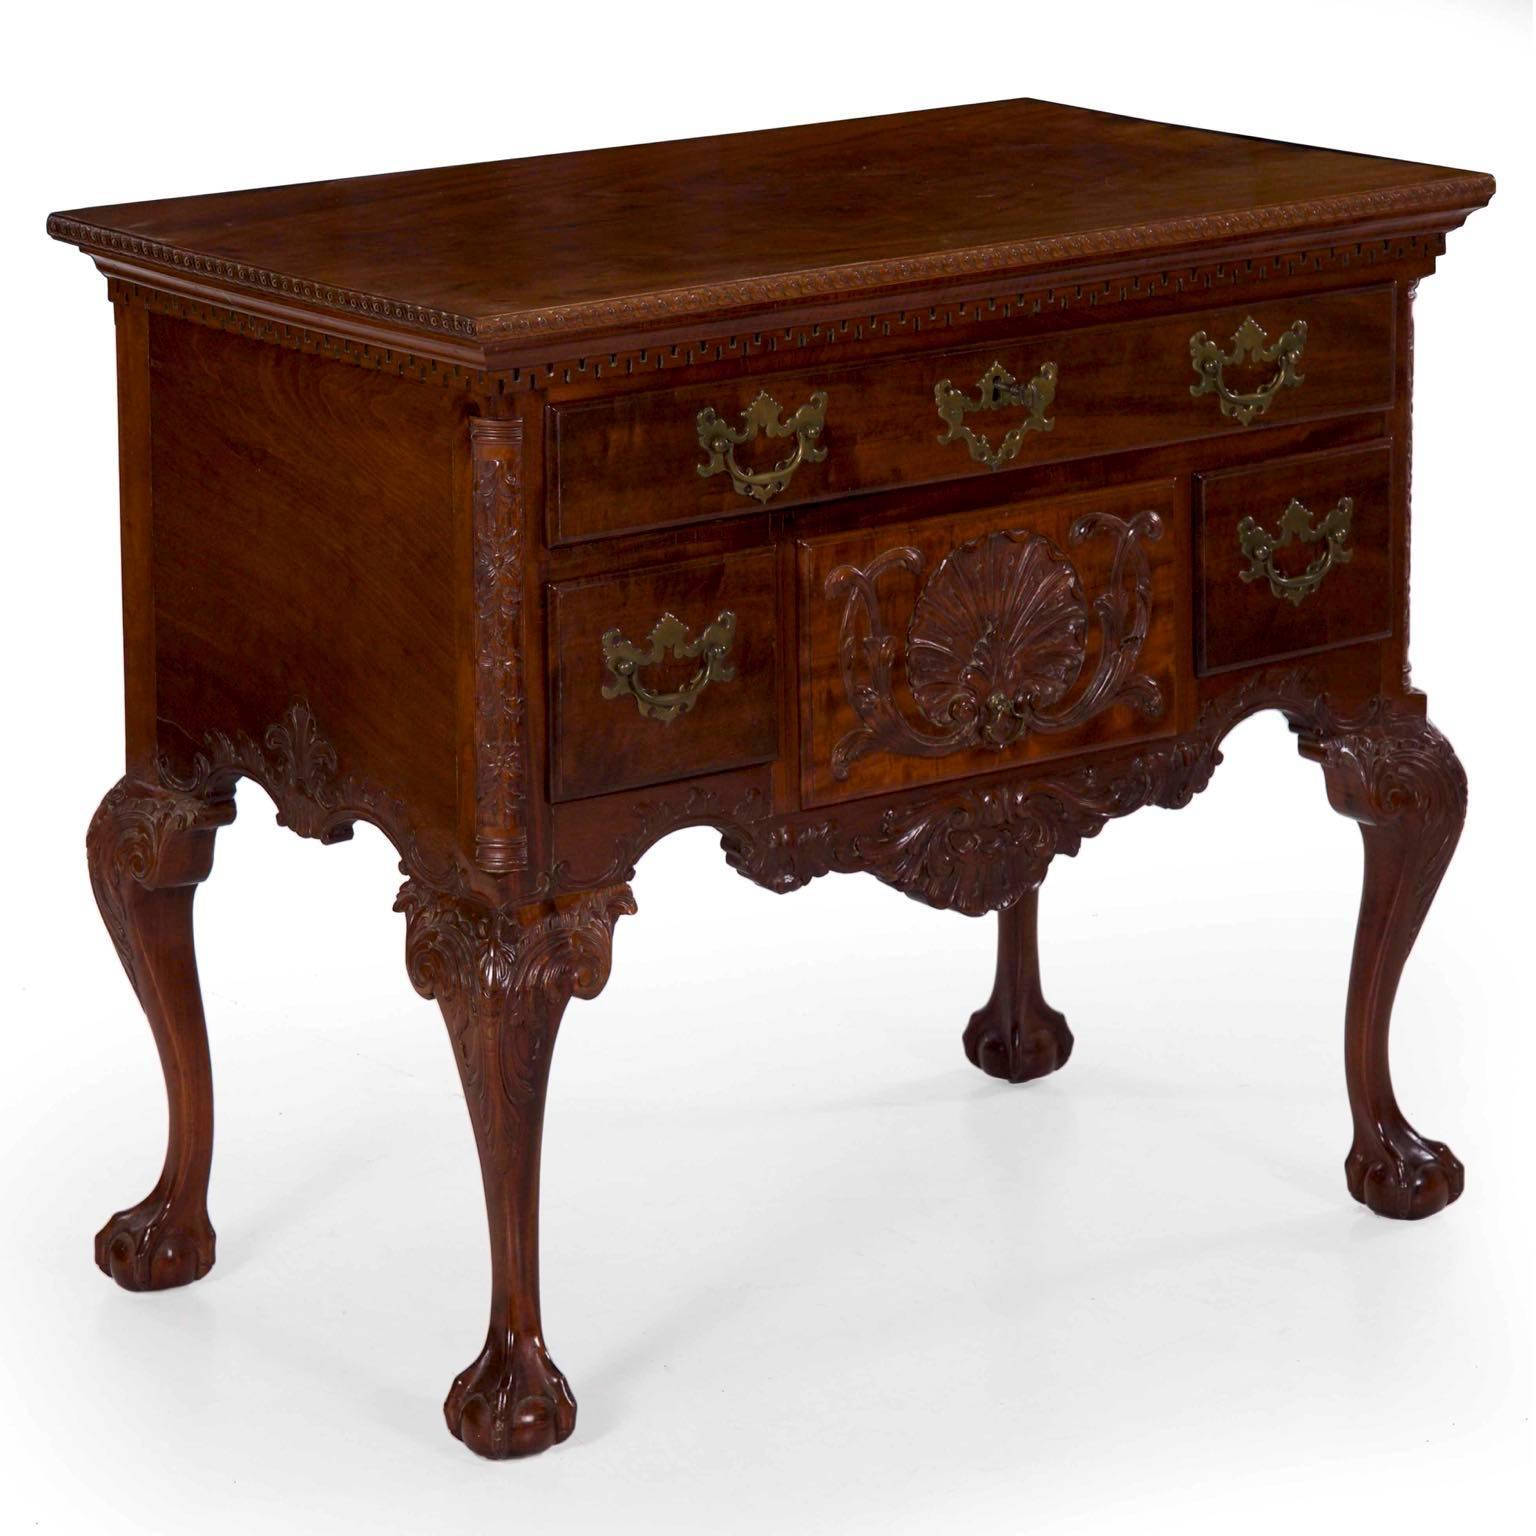 Hand-Carved 19th Century American Chippendale Style Mahogany Lowboy Chest of Drawers